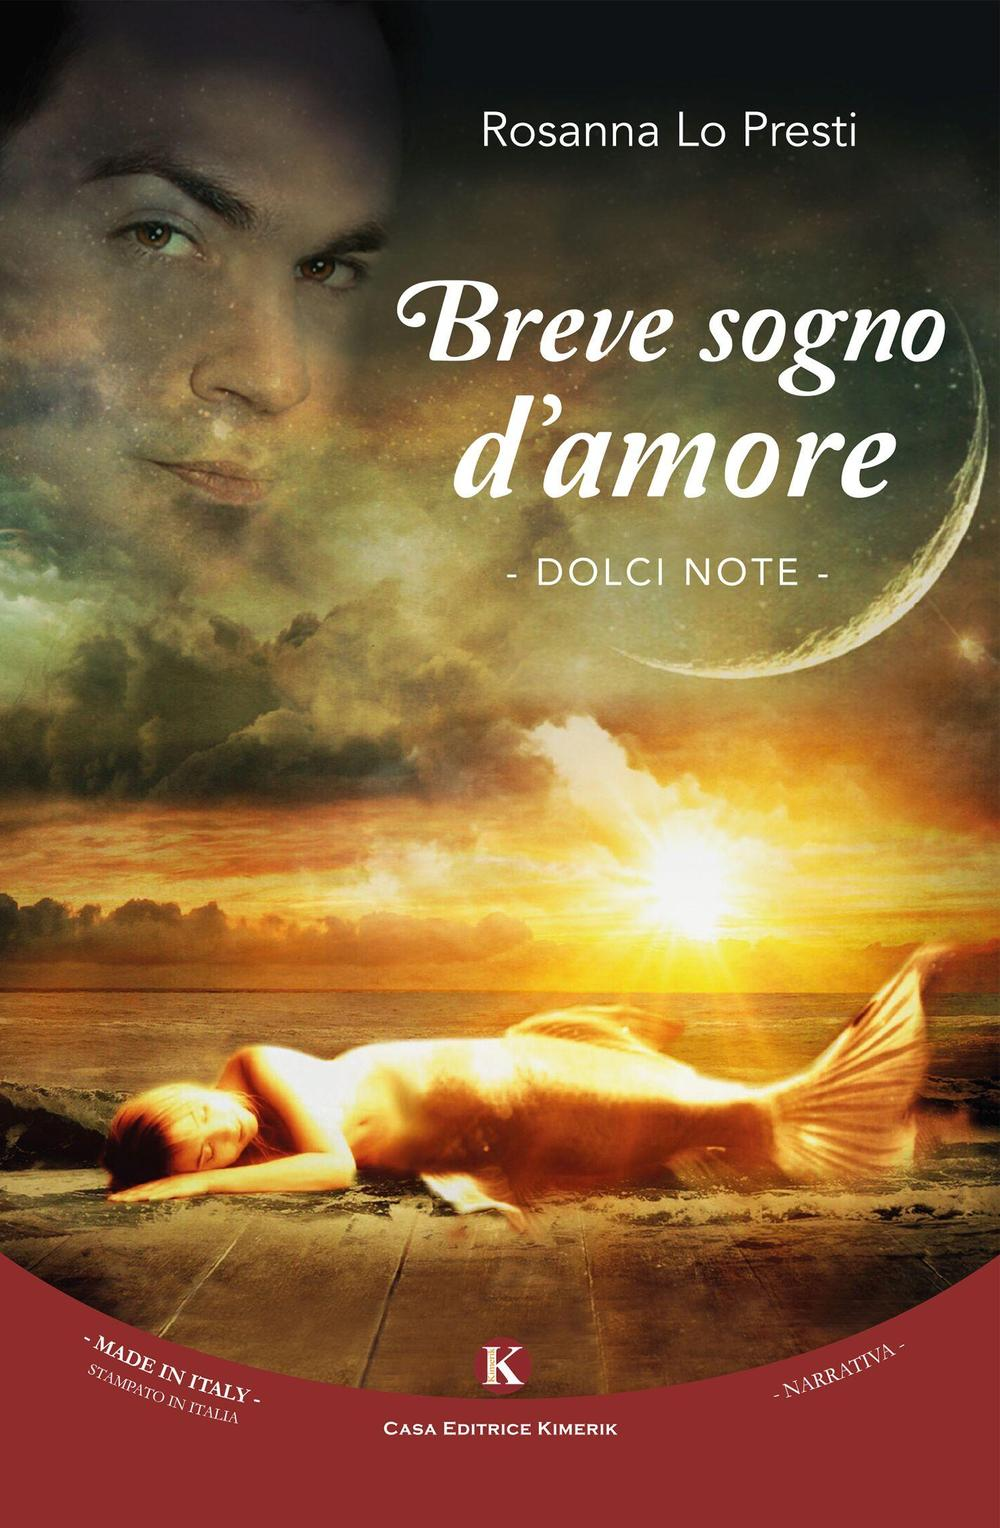 Image of Breve sogno d'amore. Dolci note